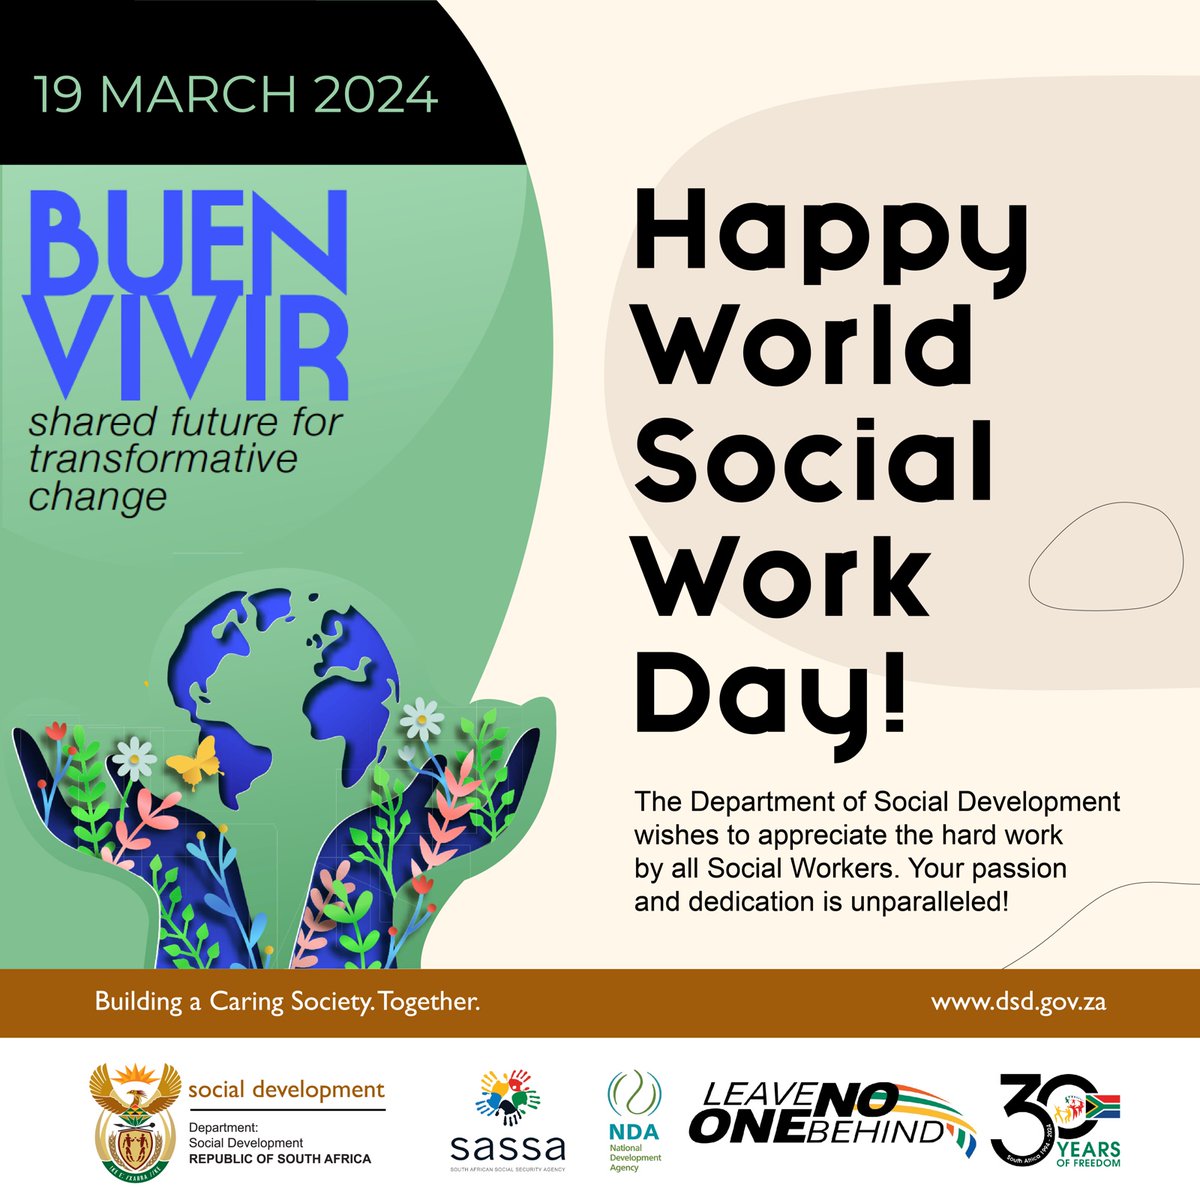 Today is World Social Work Day.

South Africa recognises and appreciates the significant role social workers play in communities across the country.

#socialworkday
#SaferCommunities
#30YearsOfFreedom
#LeaveNoOneBehind